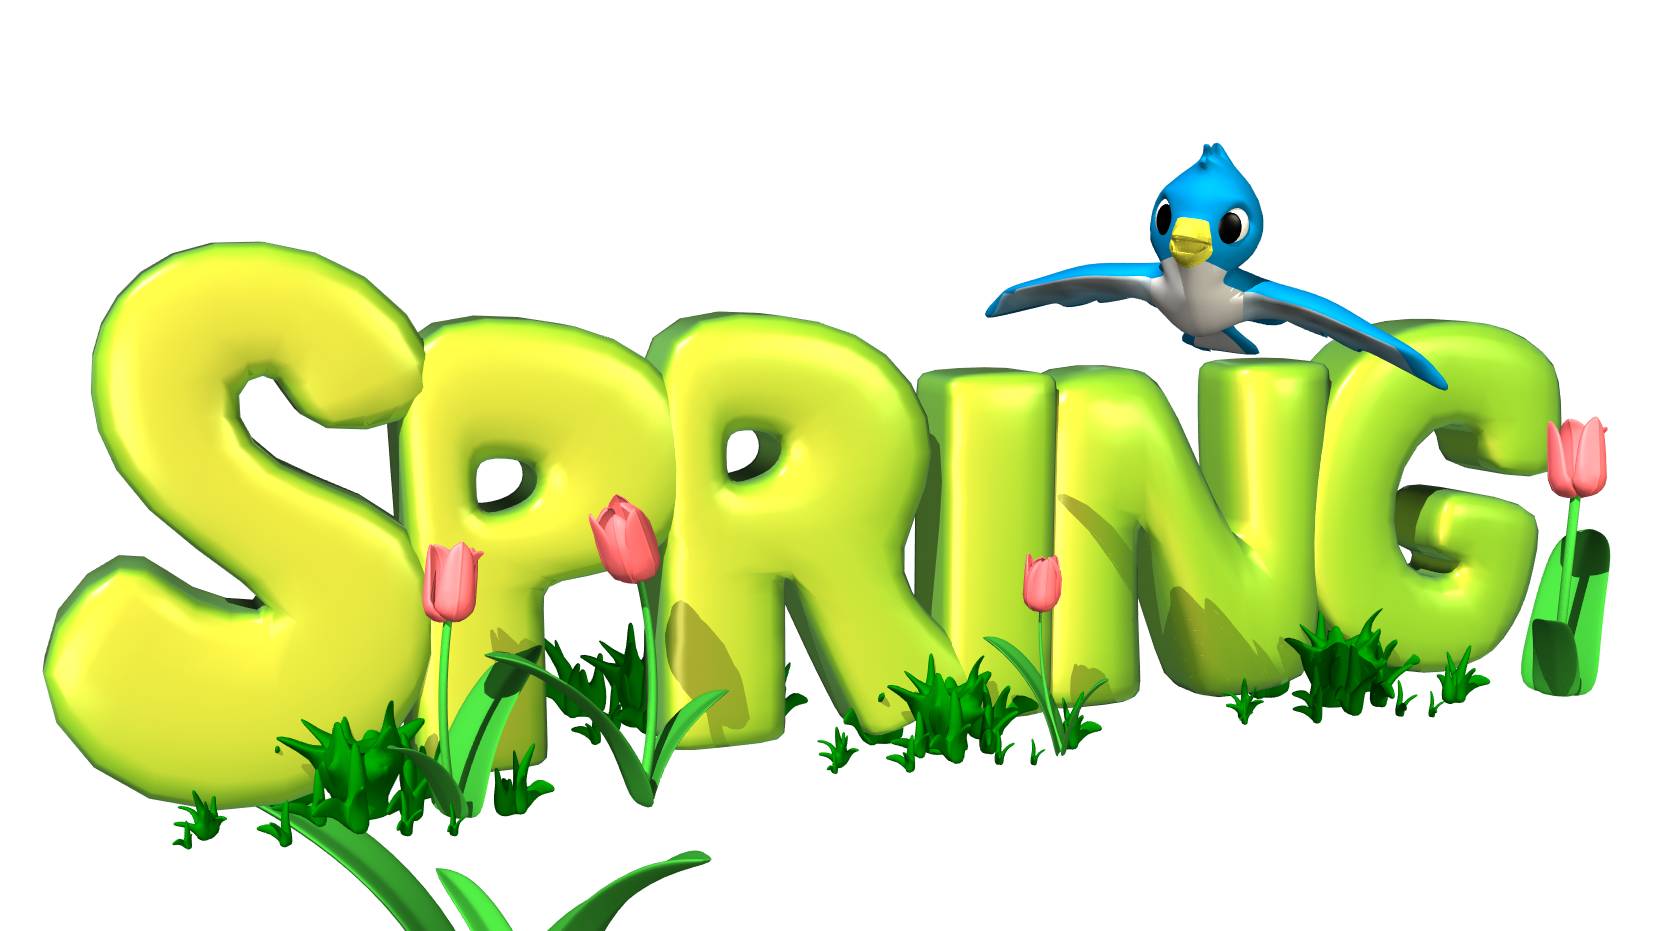 spring activities clipart - photo #31